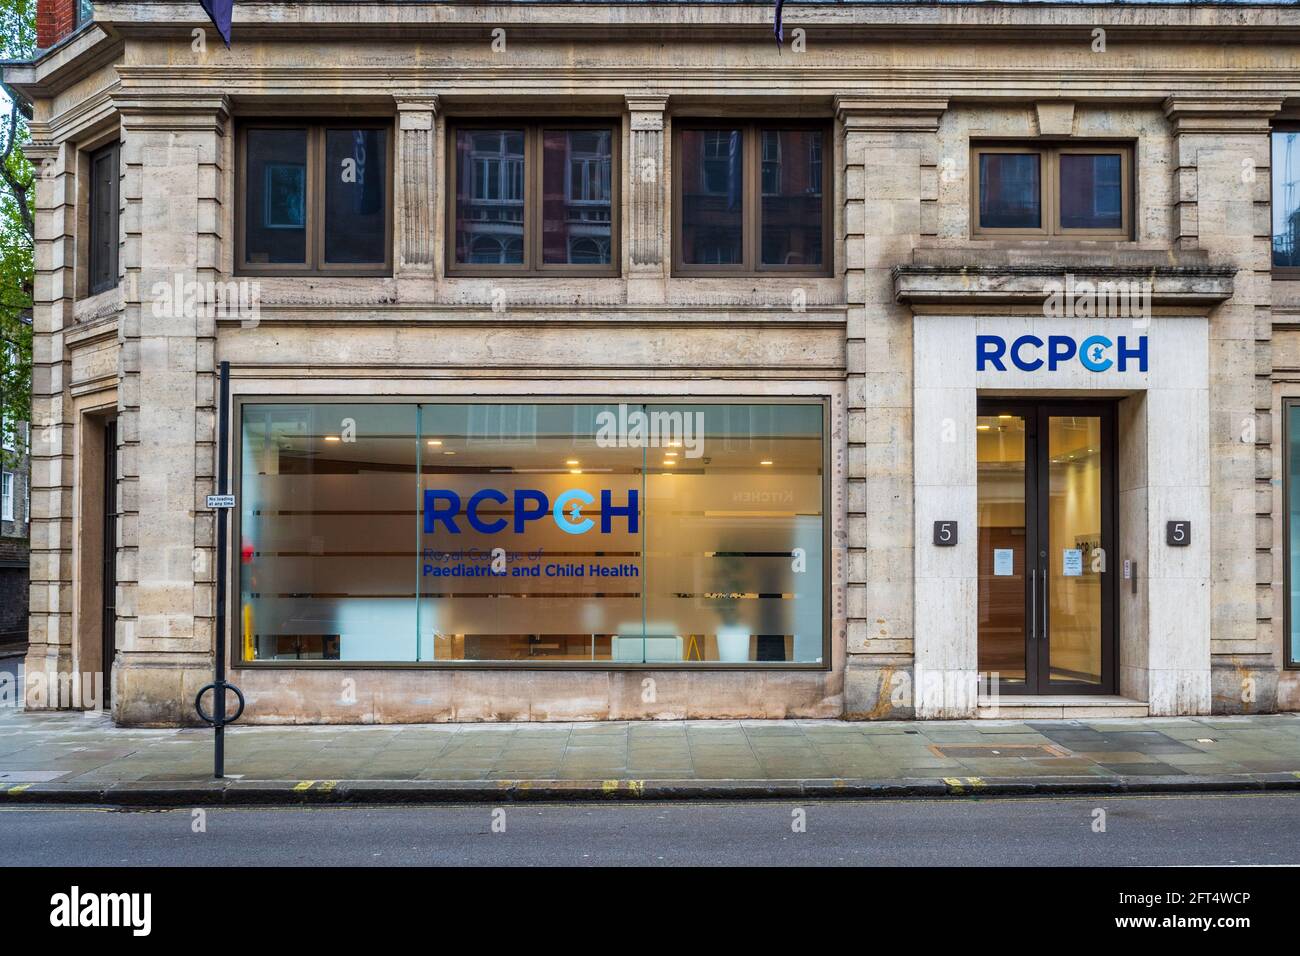 RCPCH - the Royal College of Paediatrics and Child Health on Theobalds Road in Central London, founded in 1996. Stock Photo